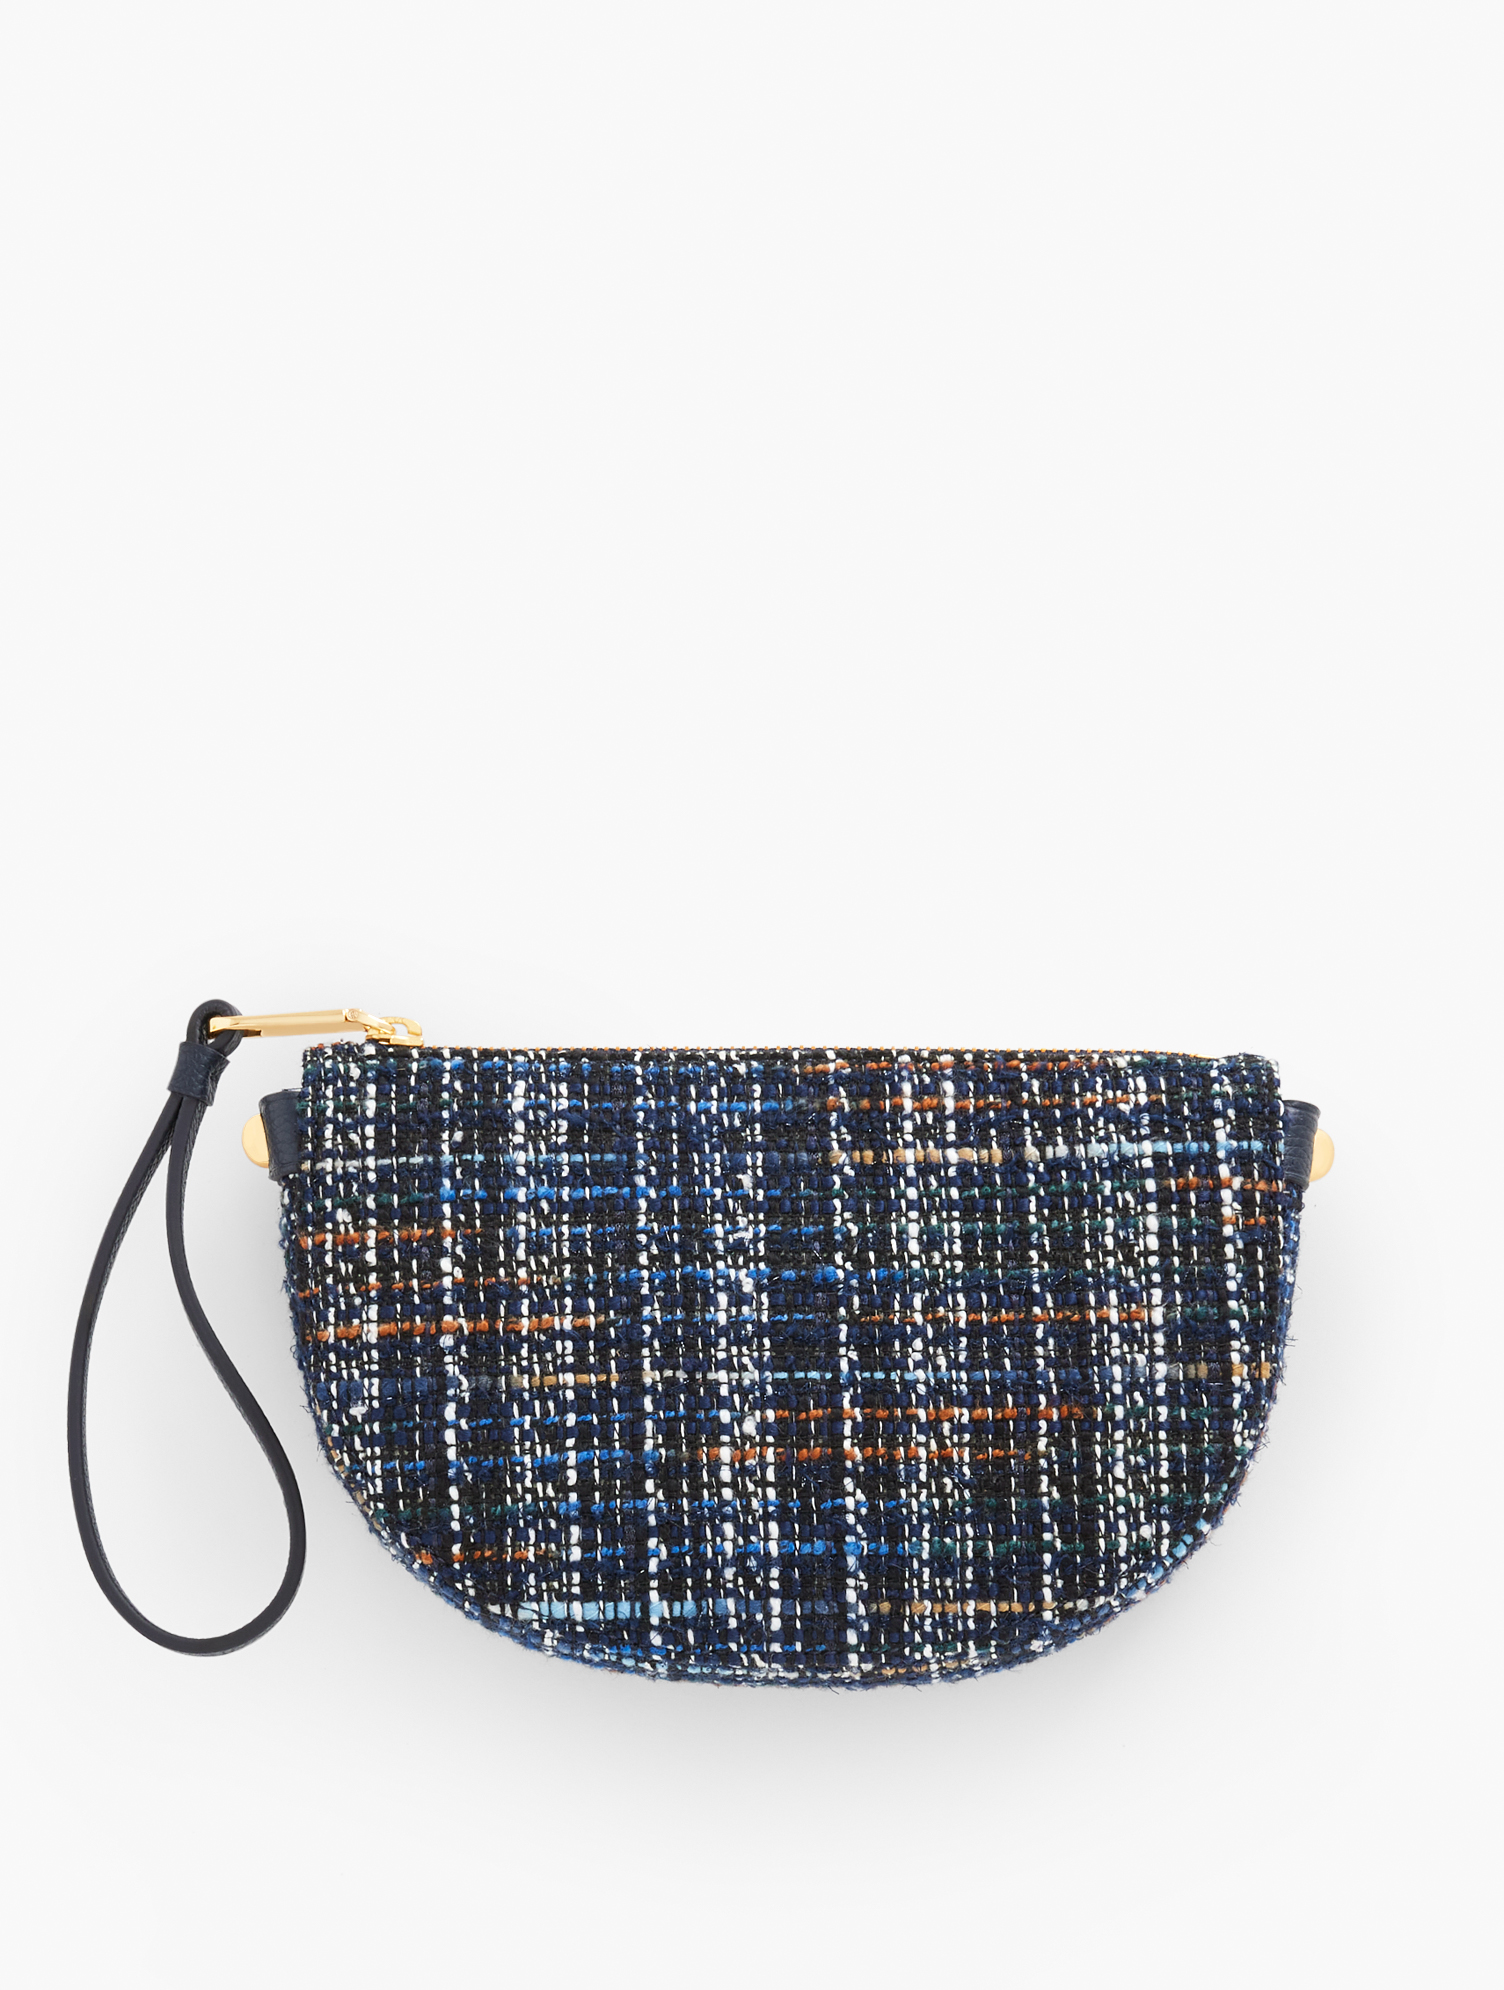 Talbots Crescent Wristlet - Space Dyed Tweed - Navy Blue - 001